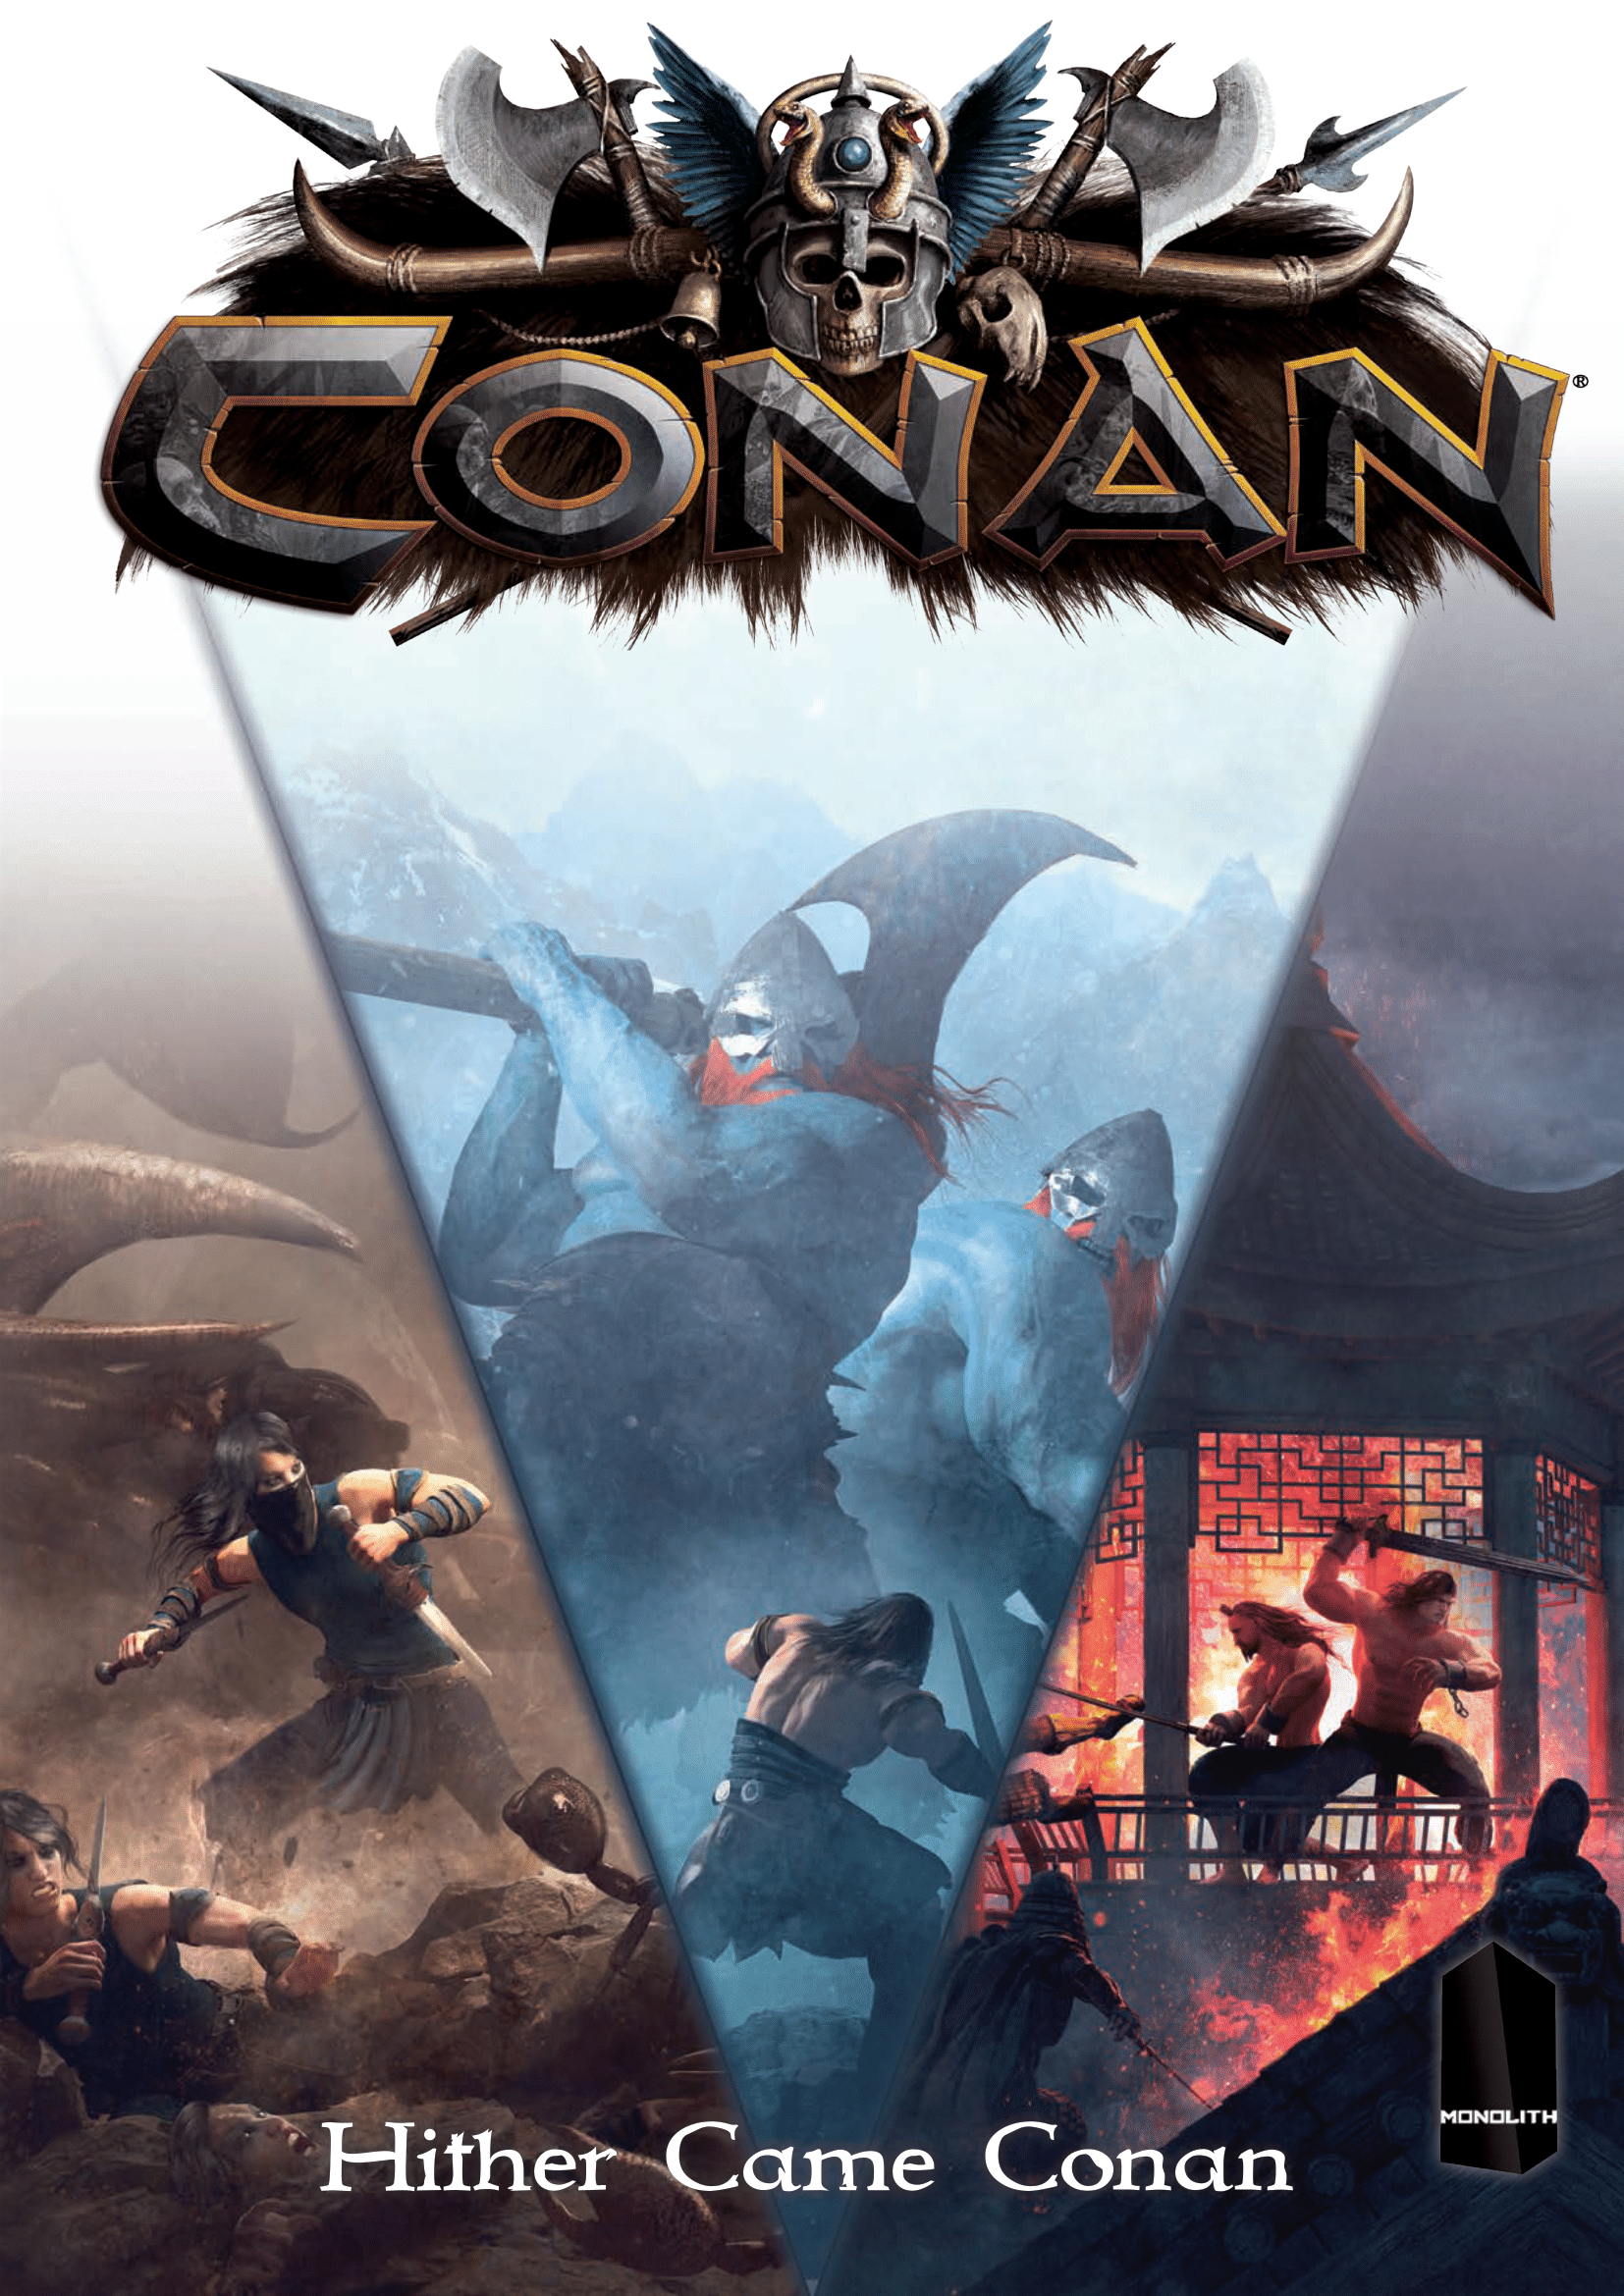 Solo/Coop Campaign "Hither came Conan" - Print Version ENG